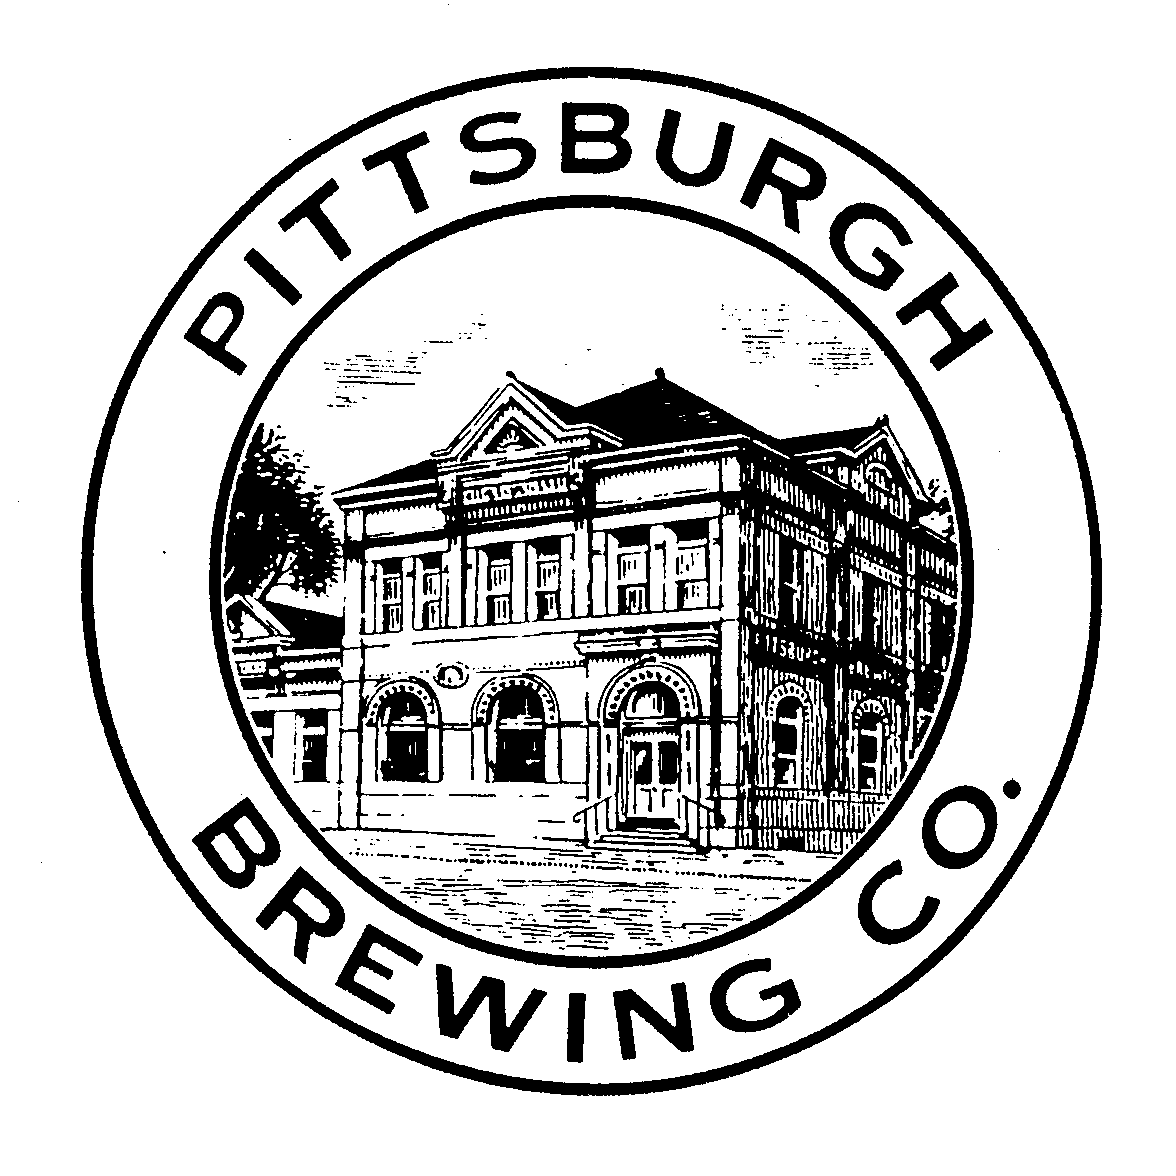  PITTSBURGH BREWING CO.